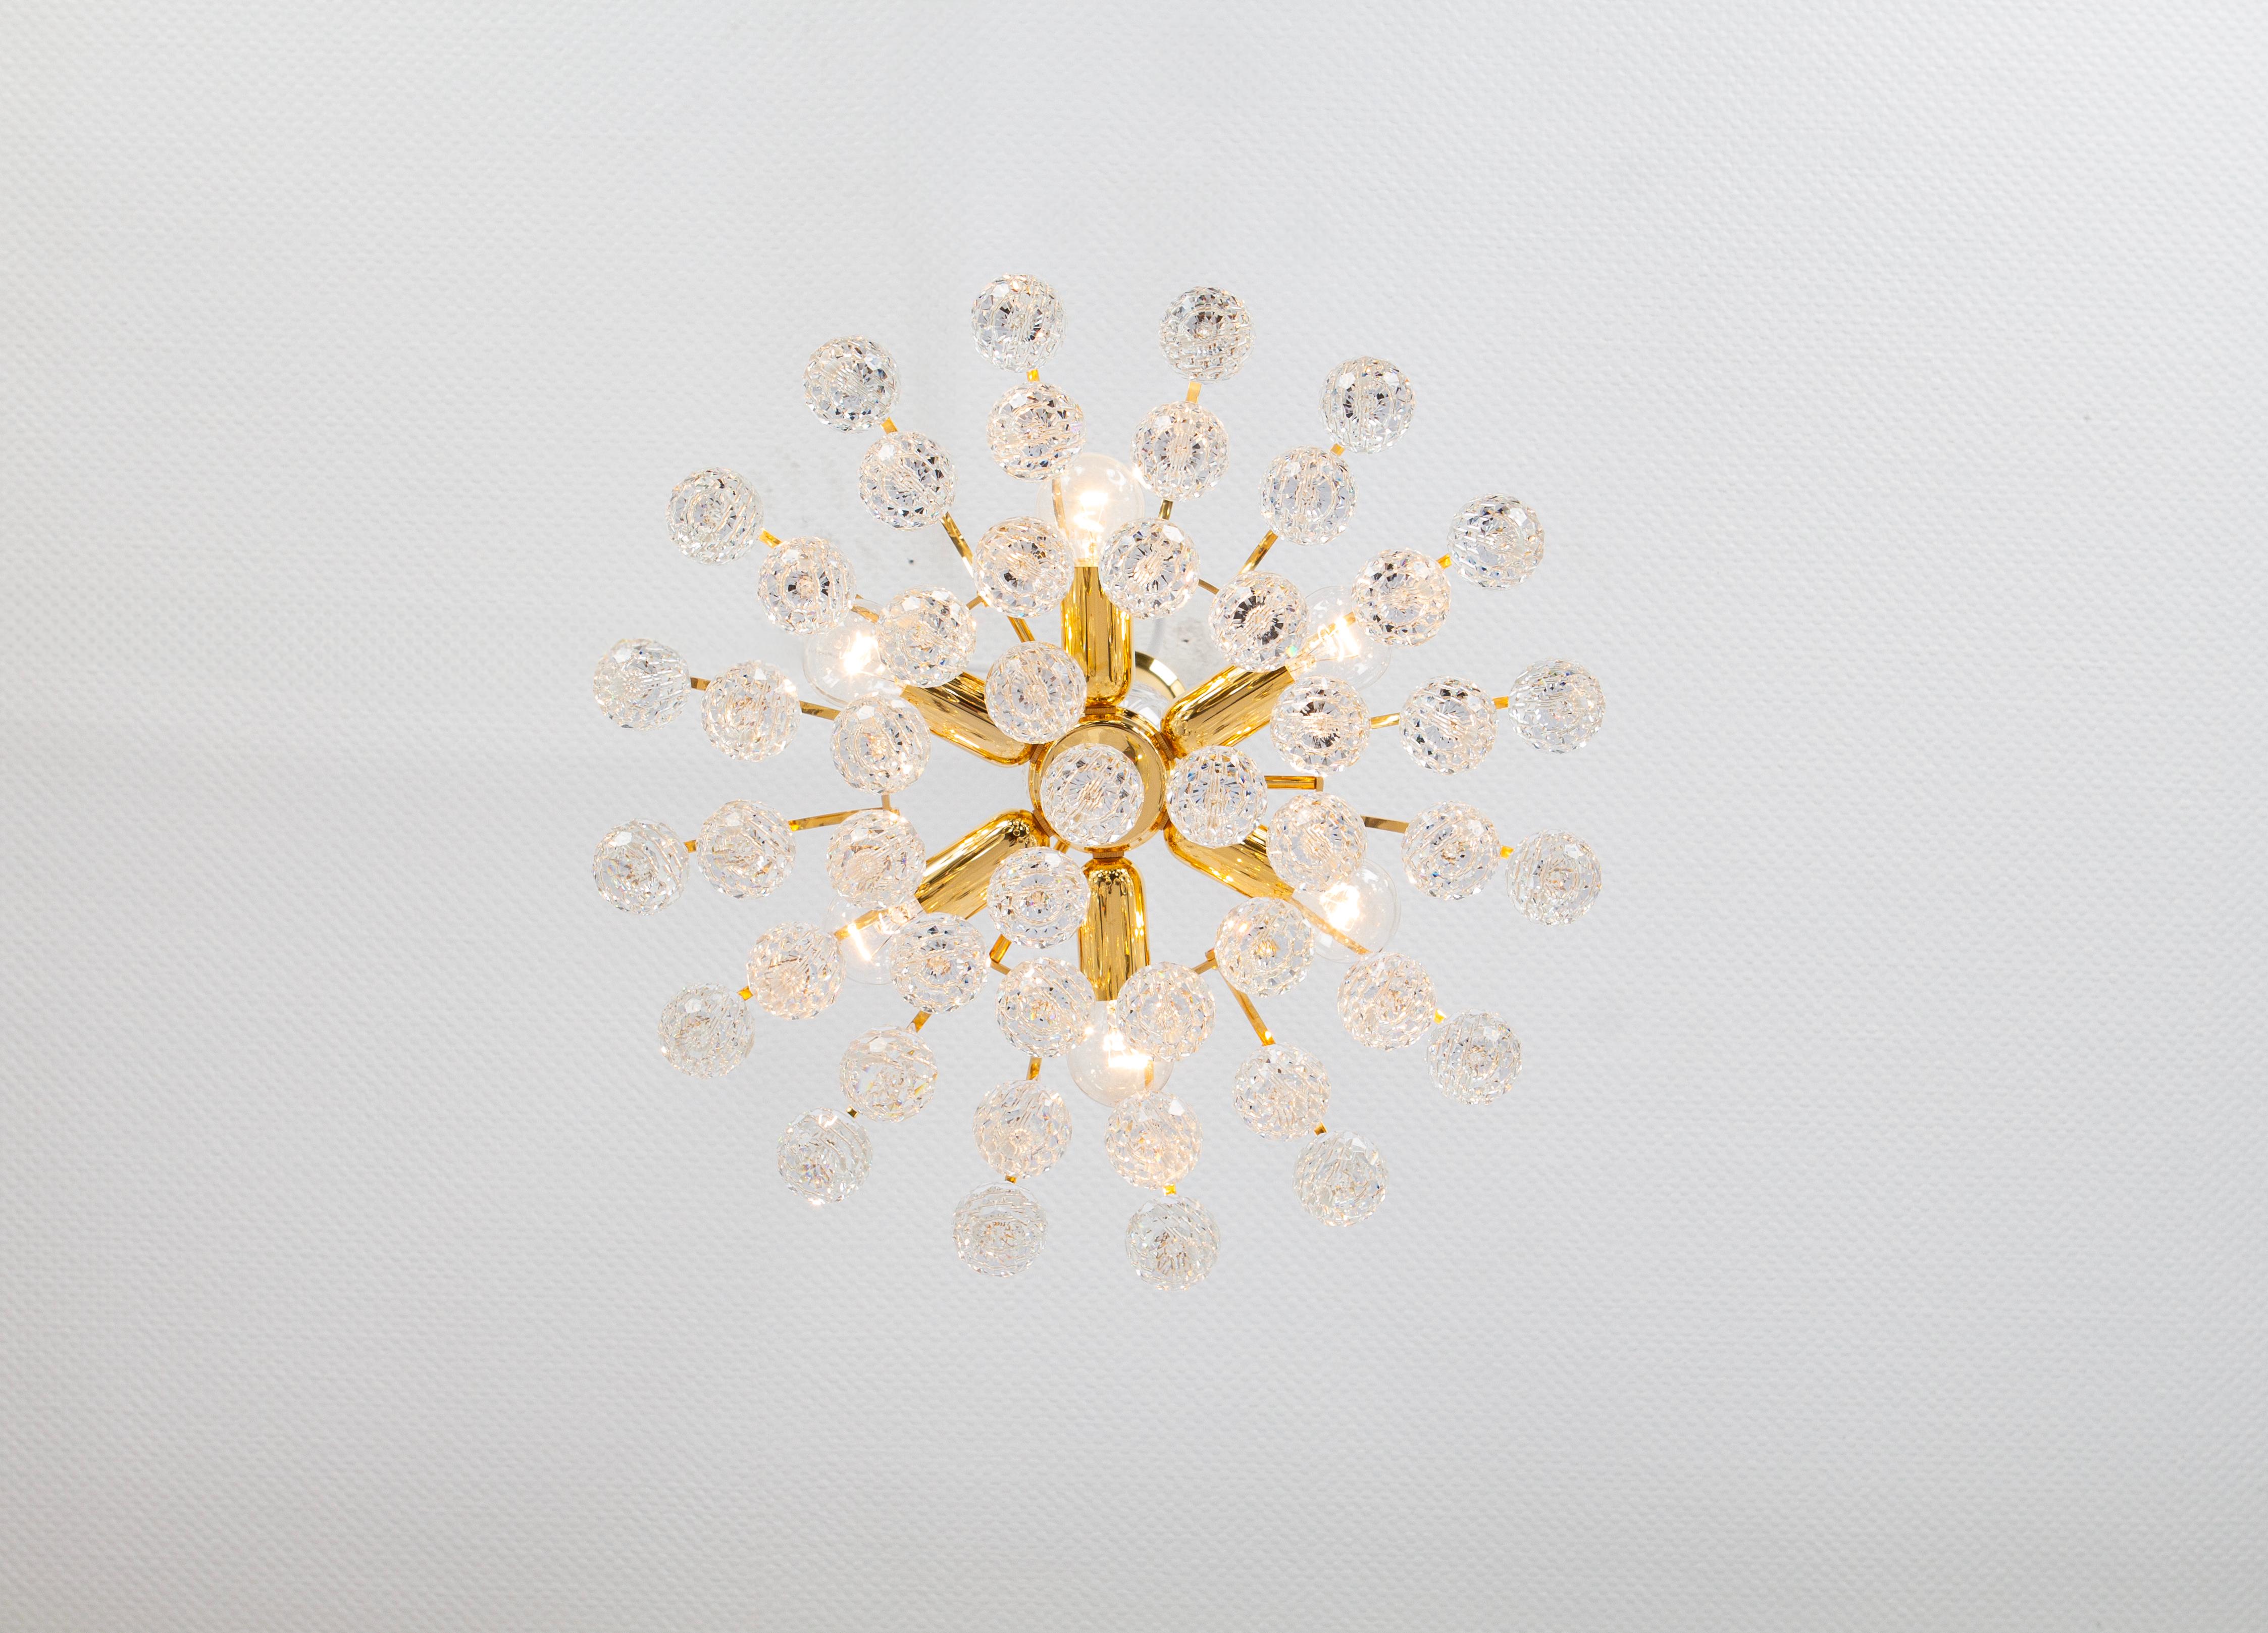 Beautiful Petite Christoph Palme Chandelier Midcentury Crystal Balls, 1970s For Sale 3